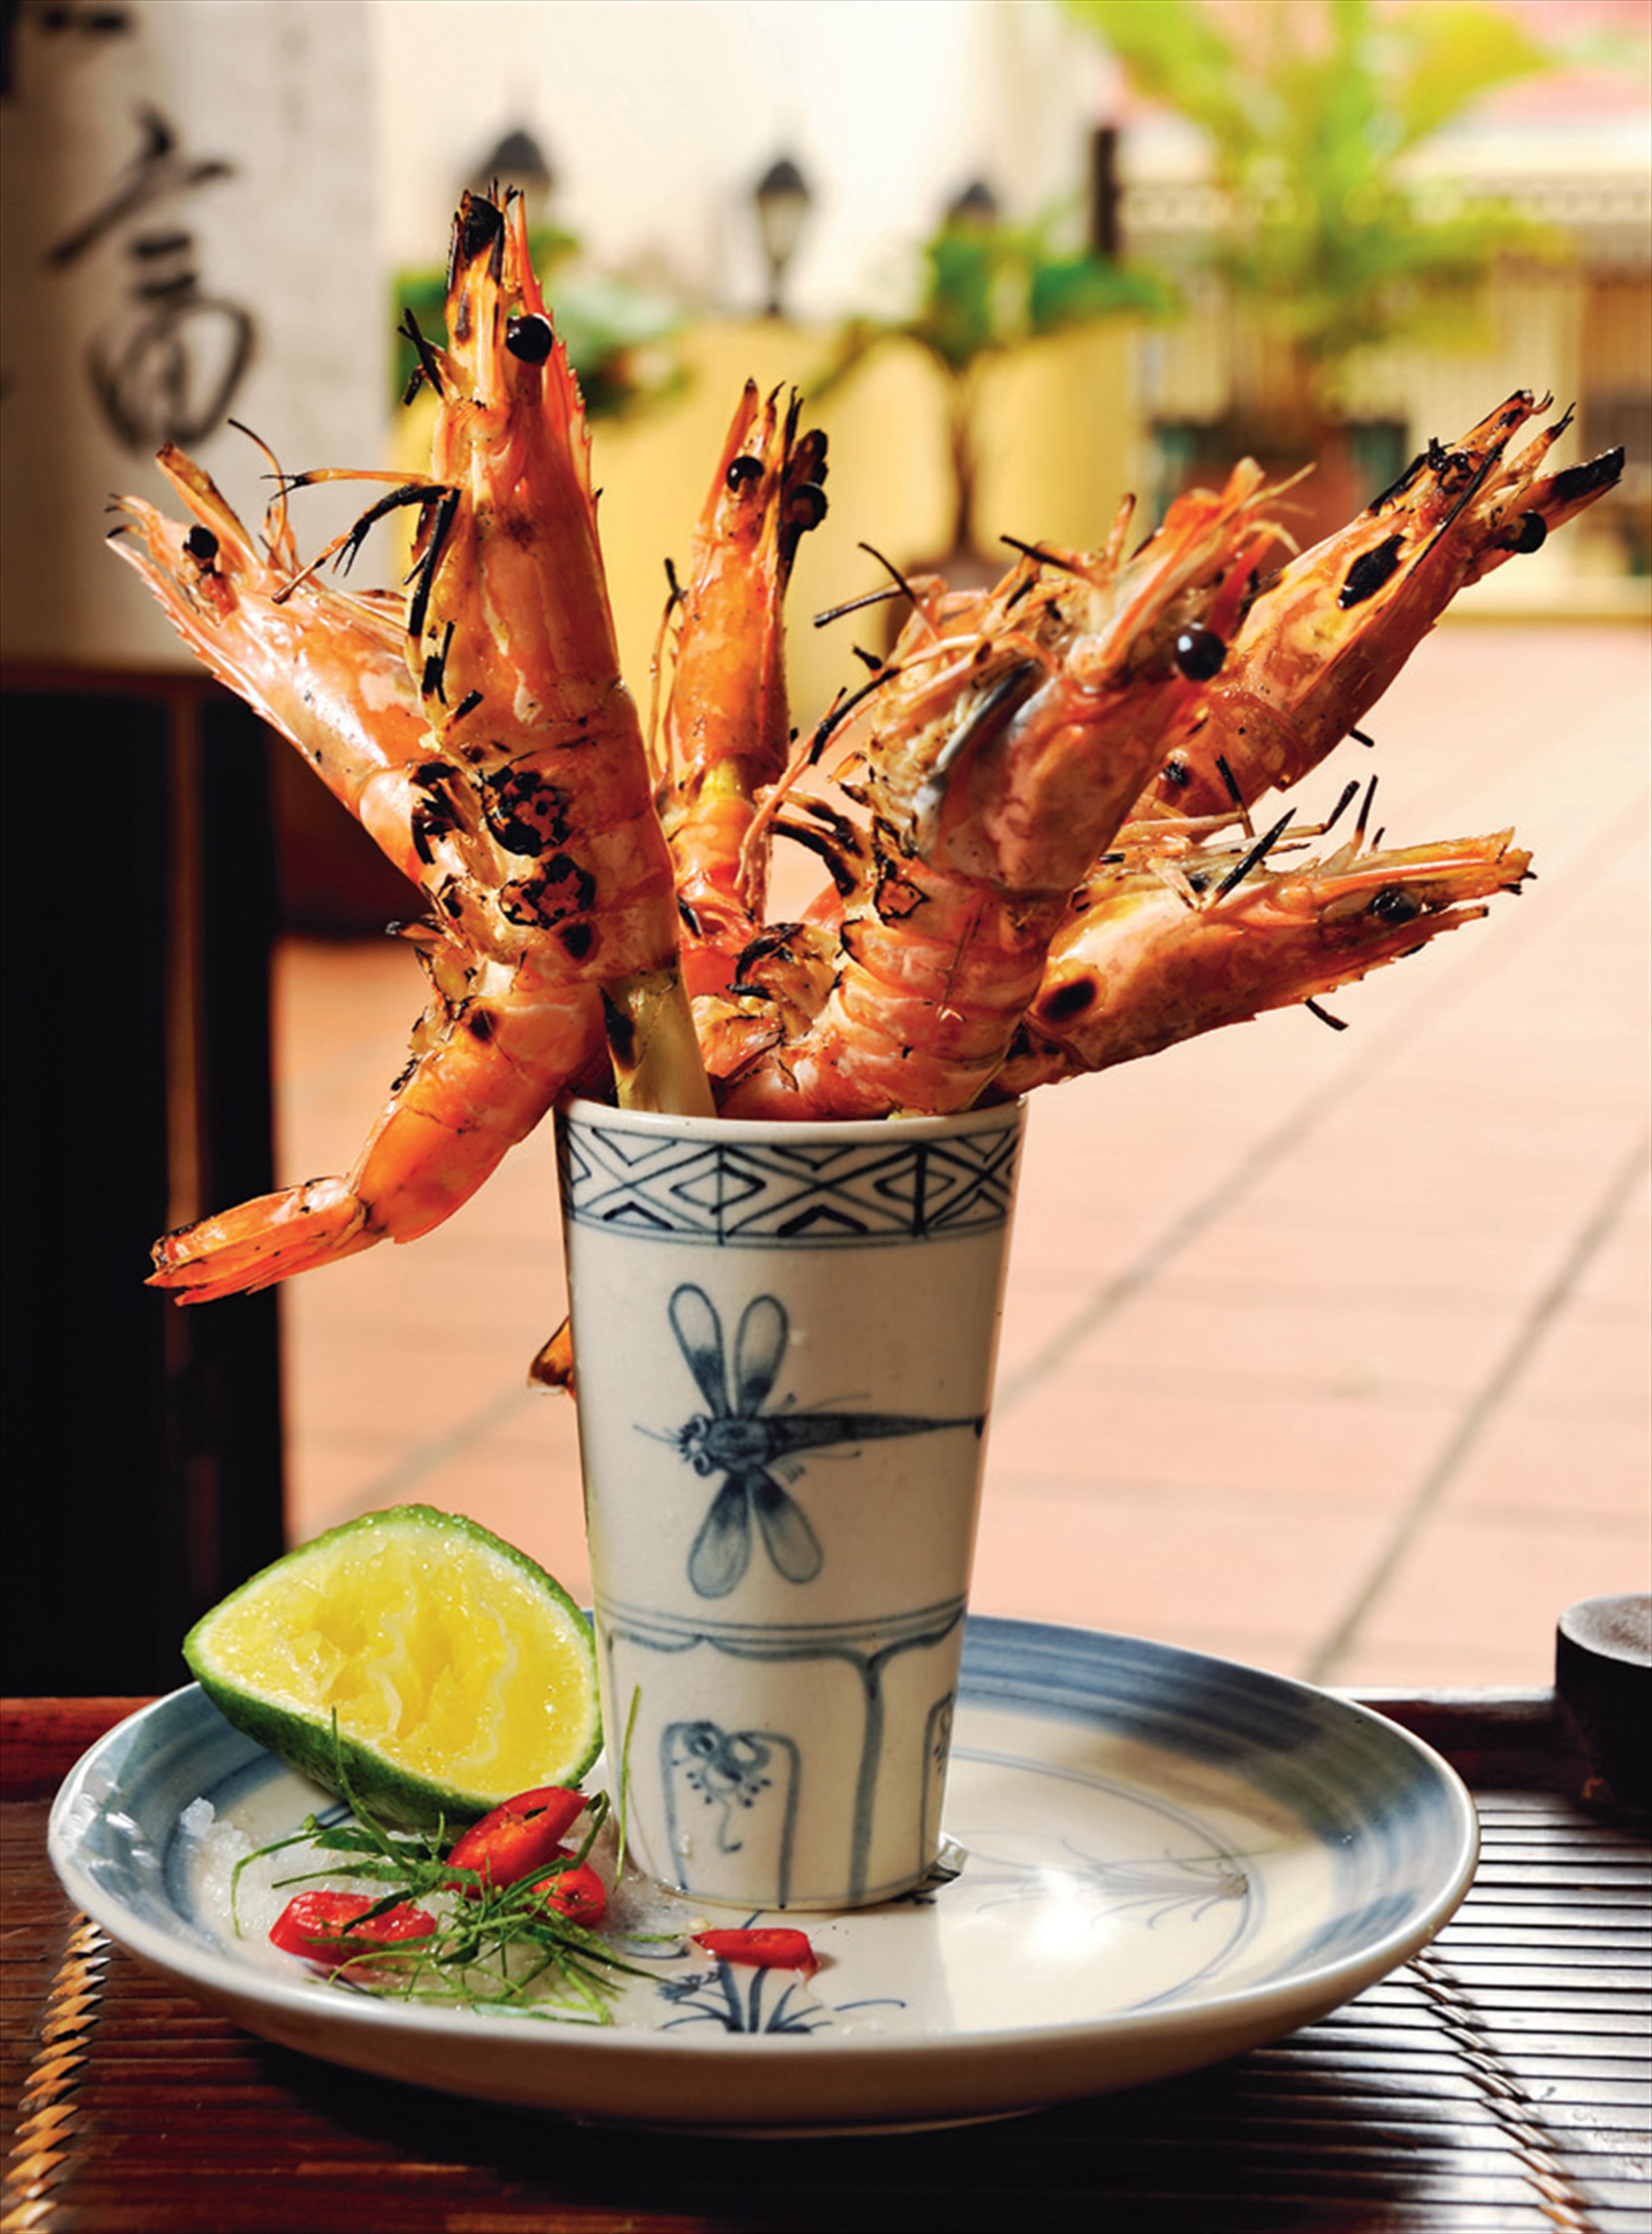 Barbecued prawns with lemongrass